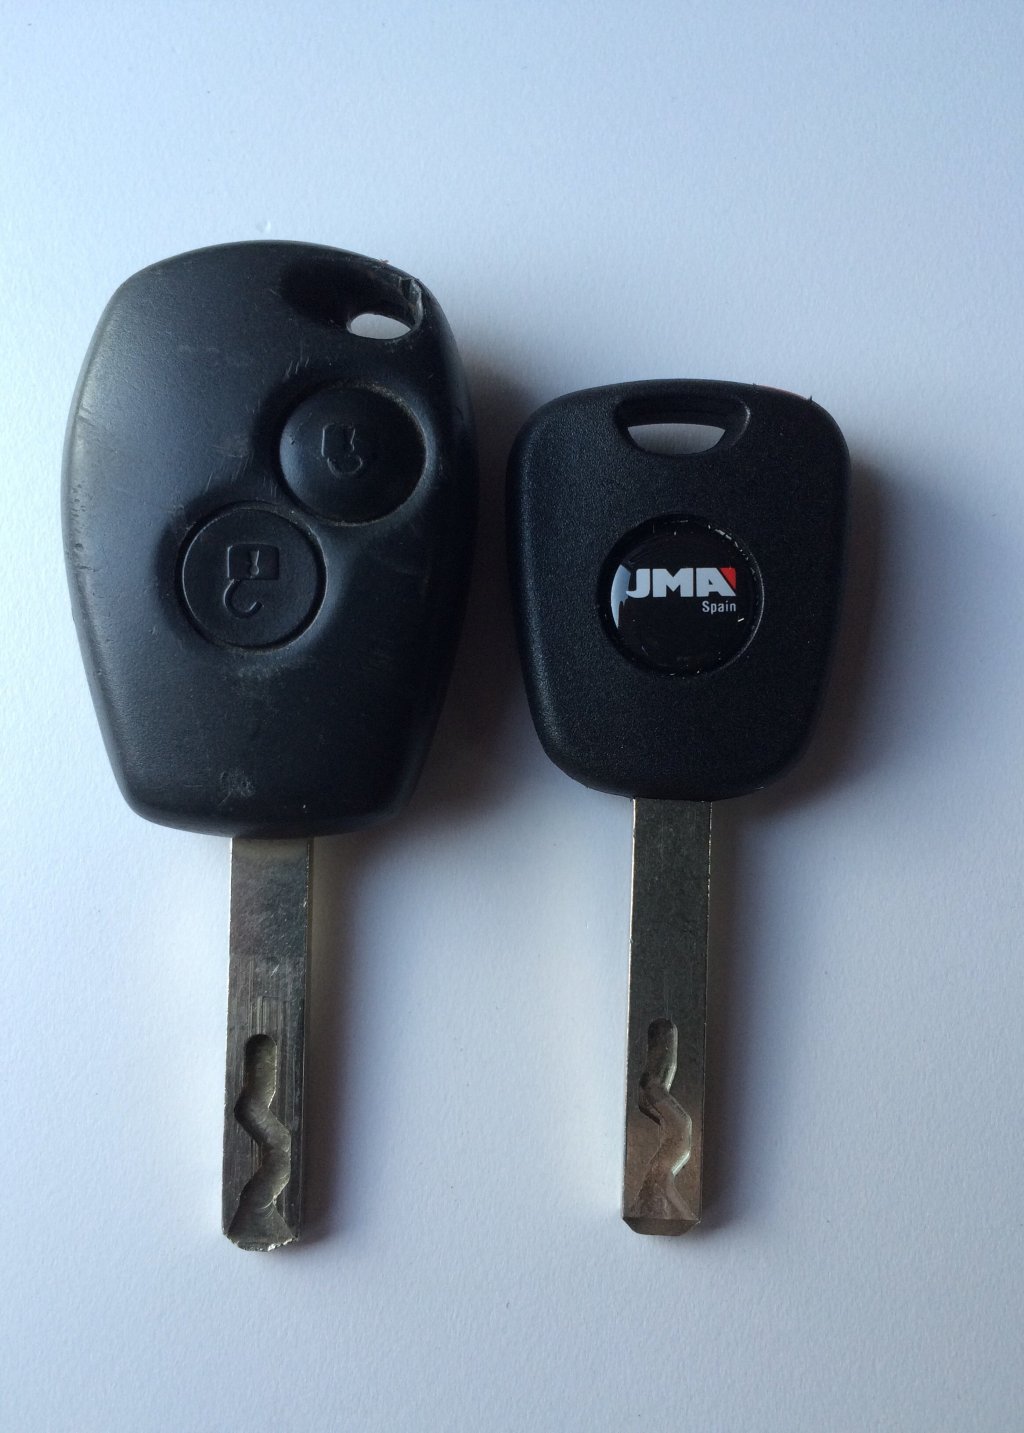 Replacement Renault Key.